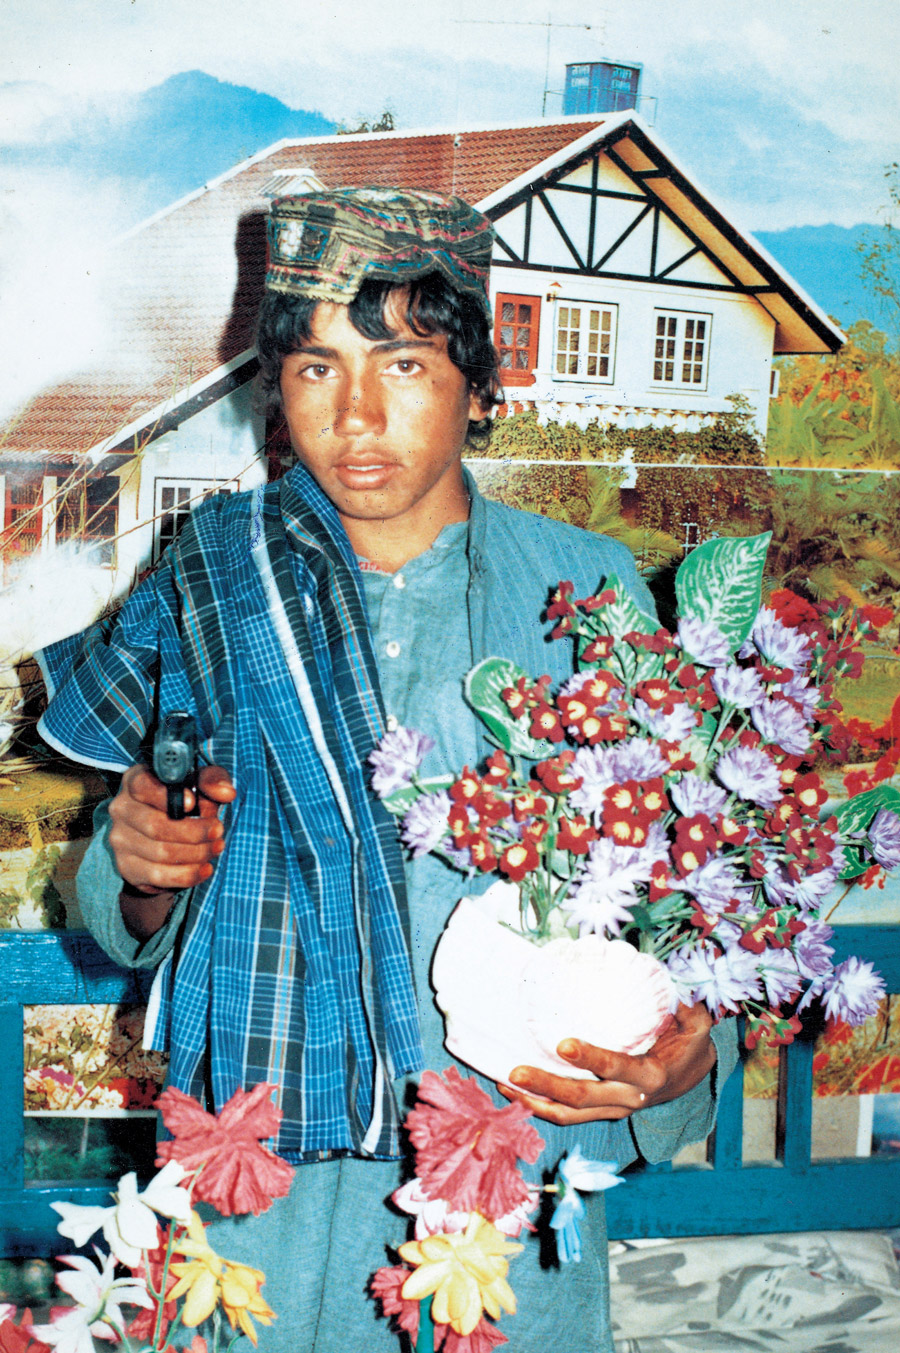 Studio portrait of a boy holding flowers and a gun in front of a cottage garden backdrop.